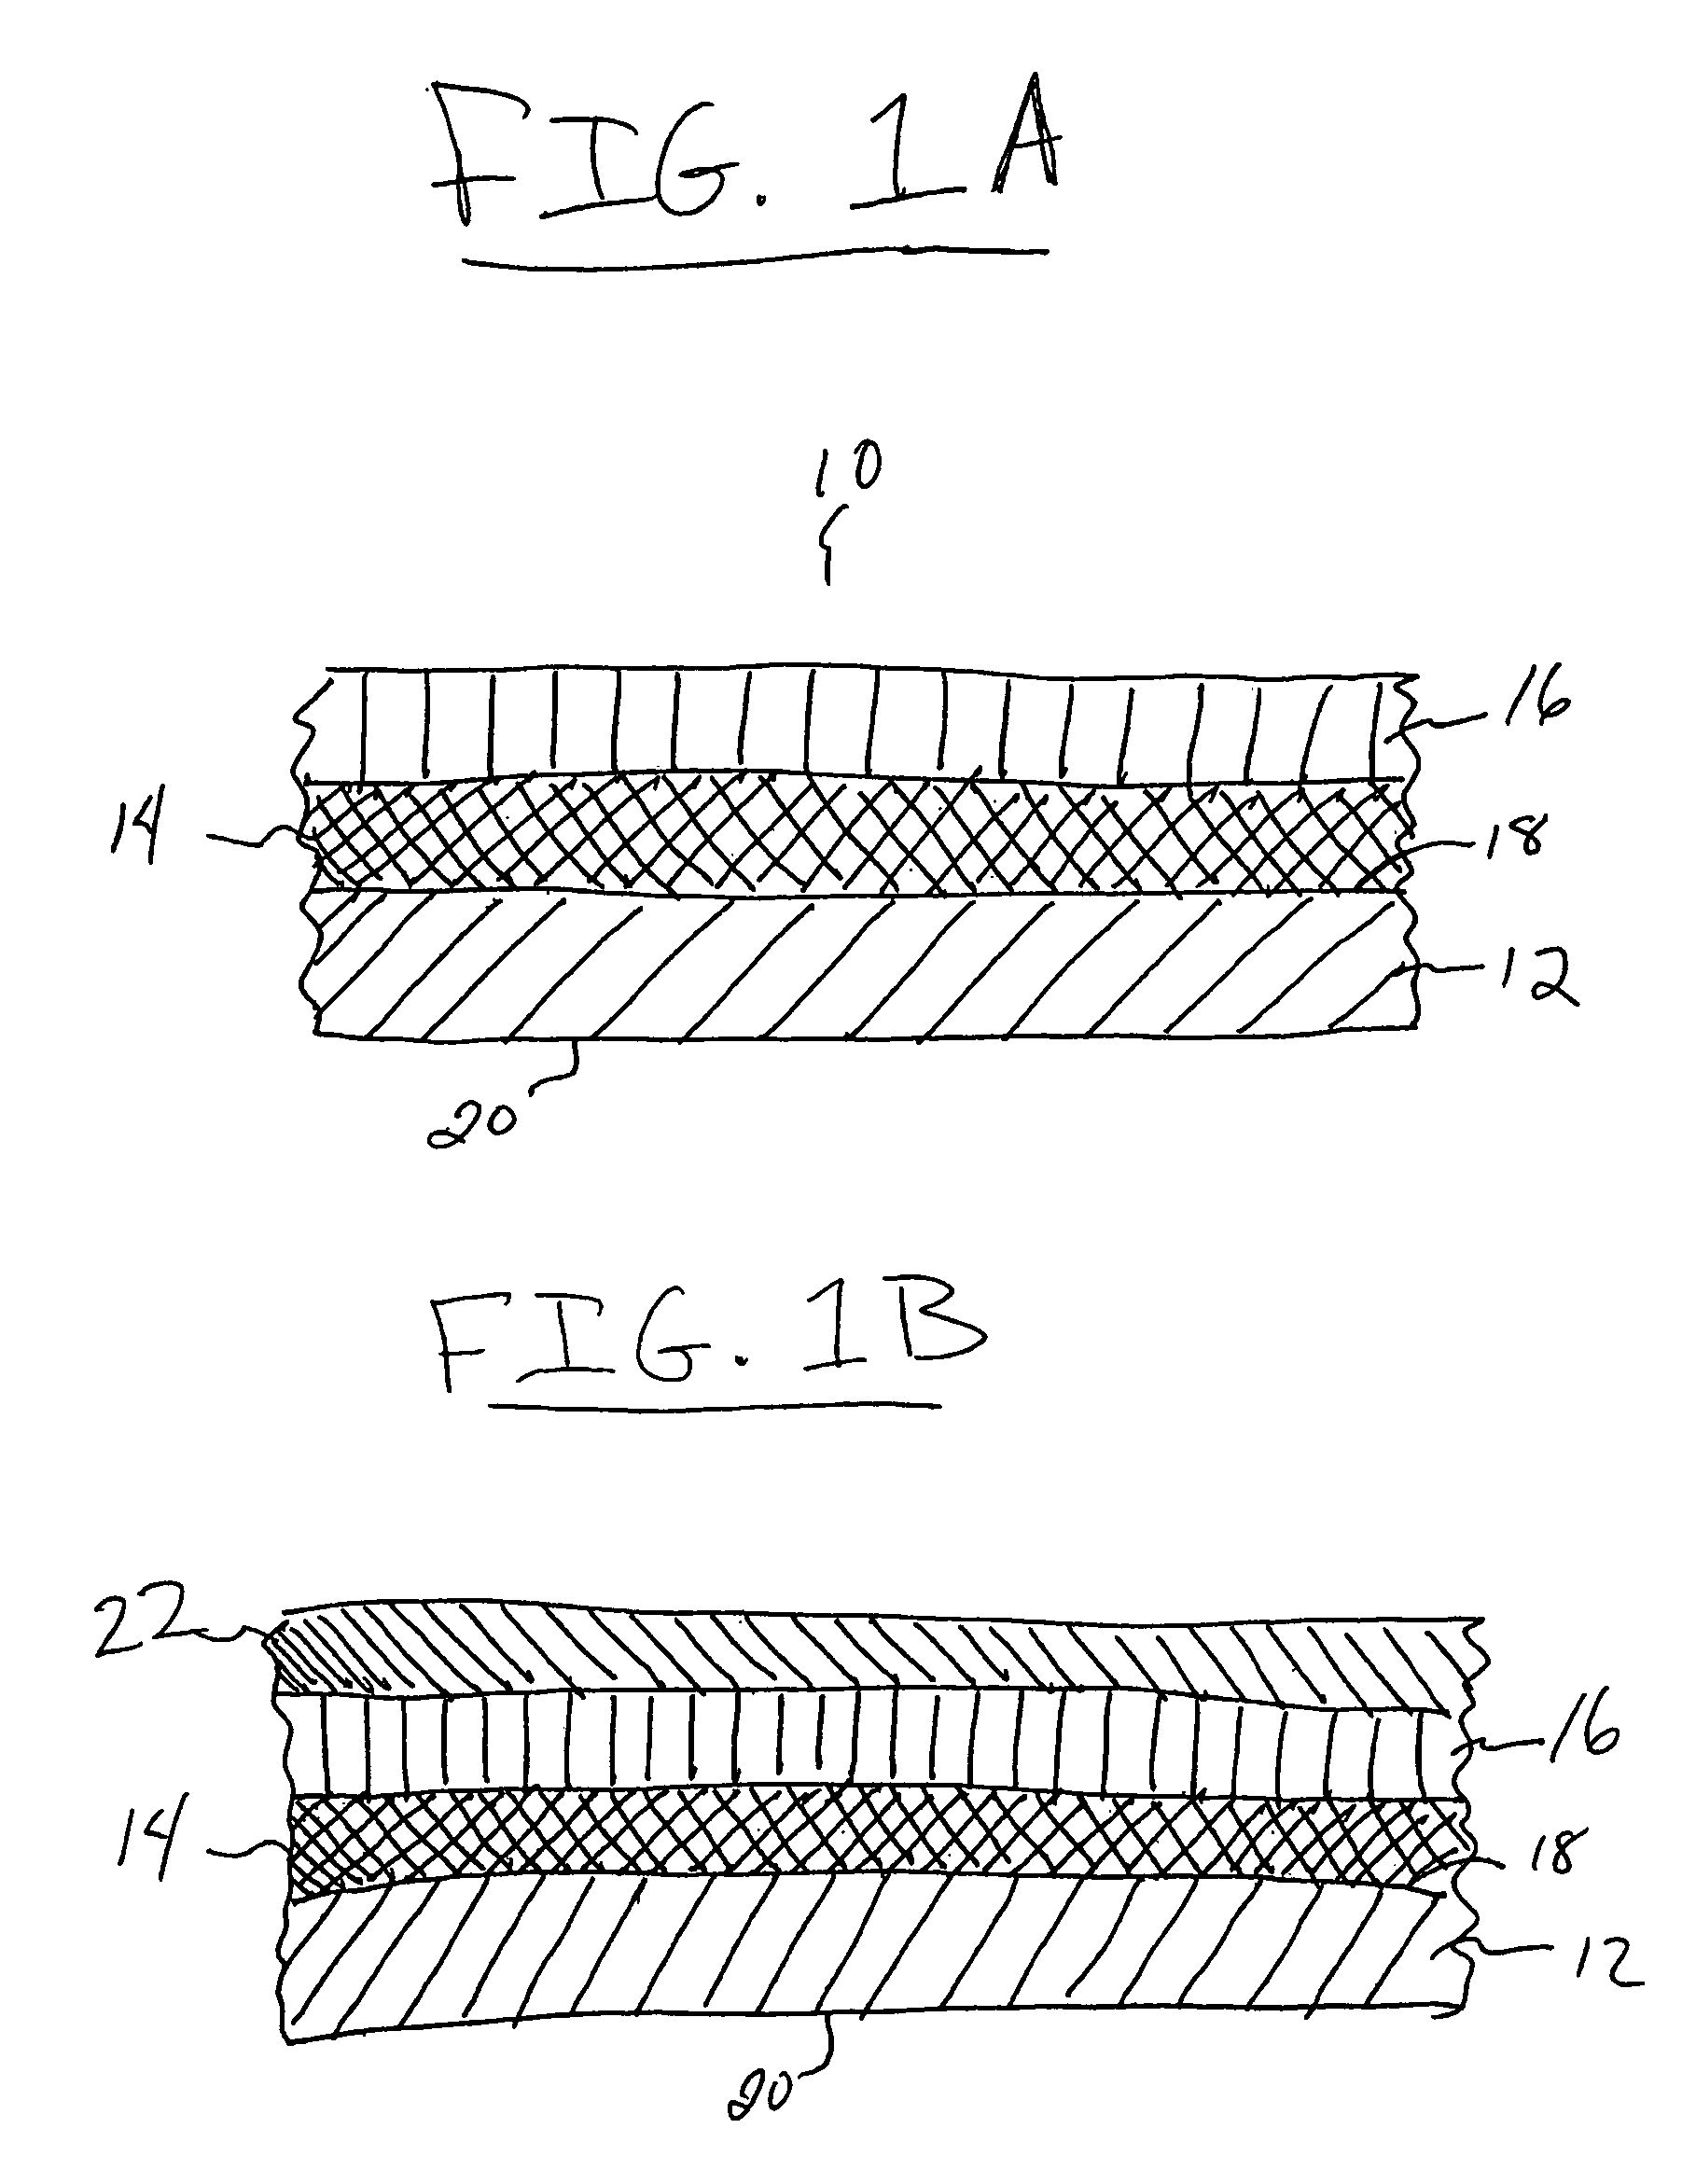 Multi-layer radiation detector and related methods